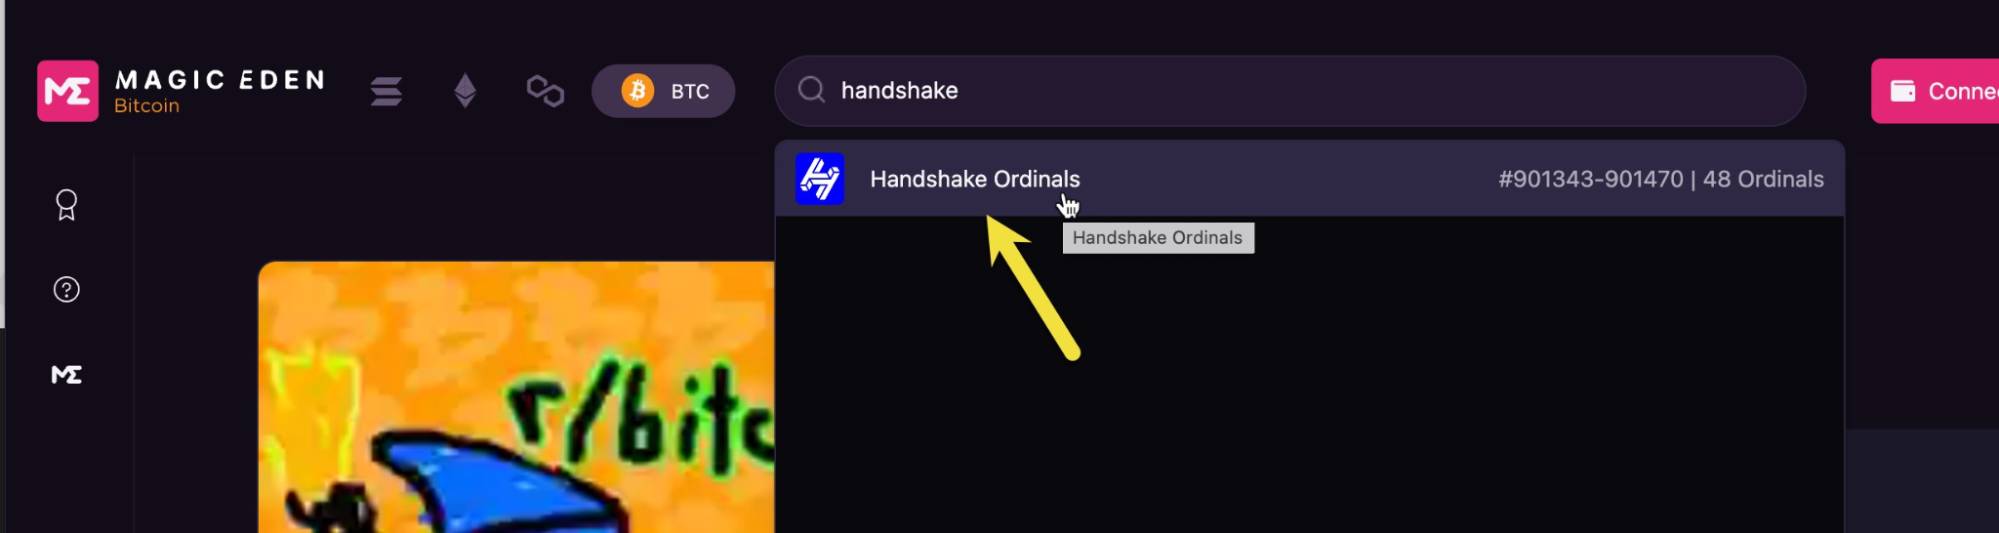 How To Find These Handshake Ordinals